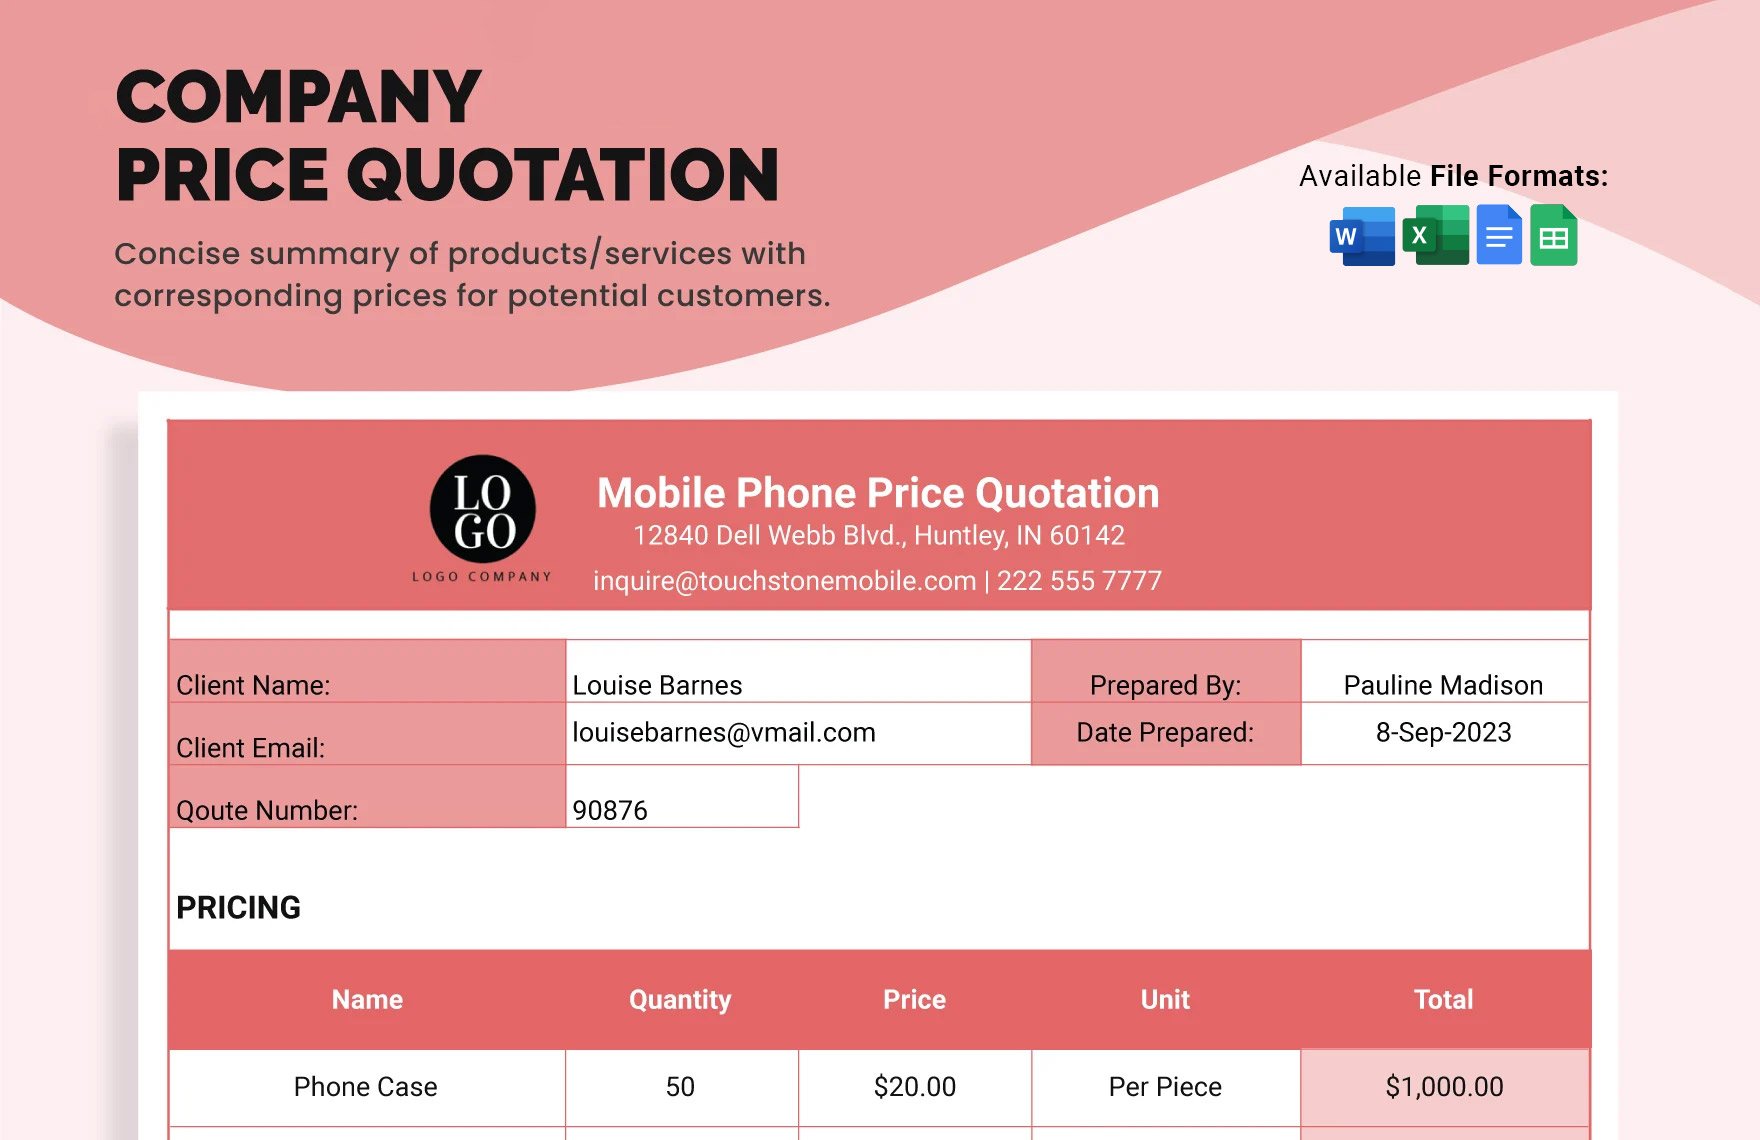 Company Price Quotation Template